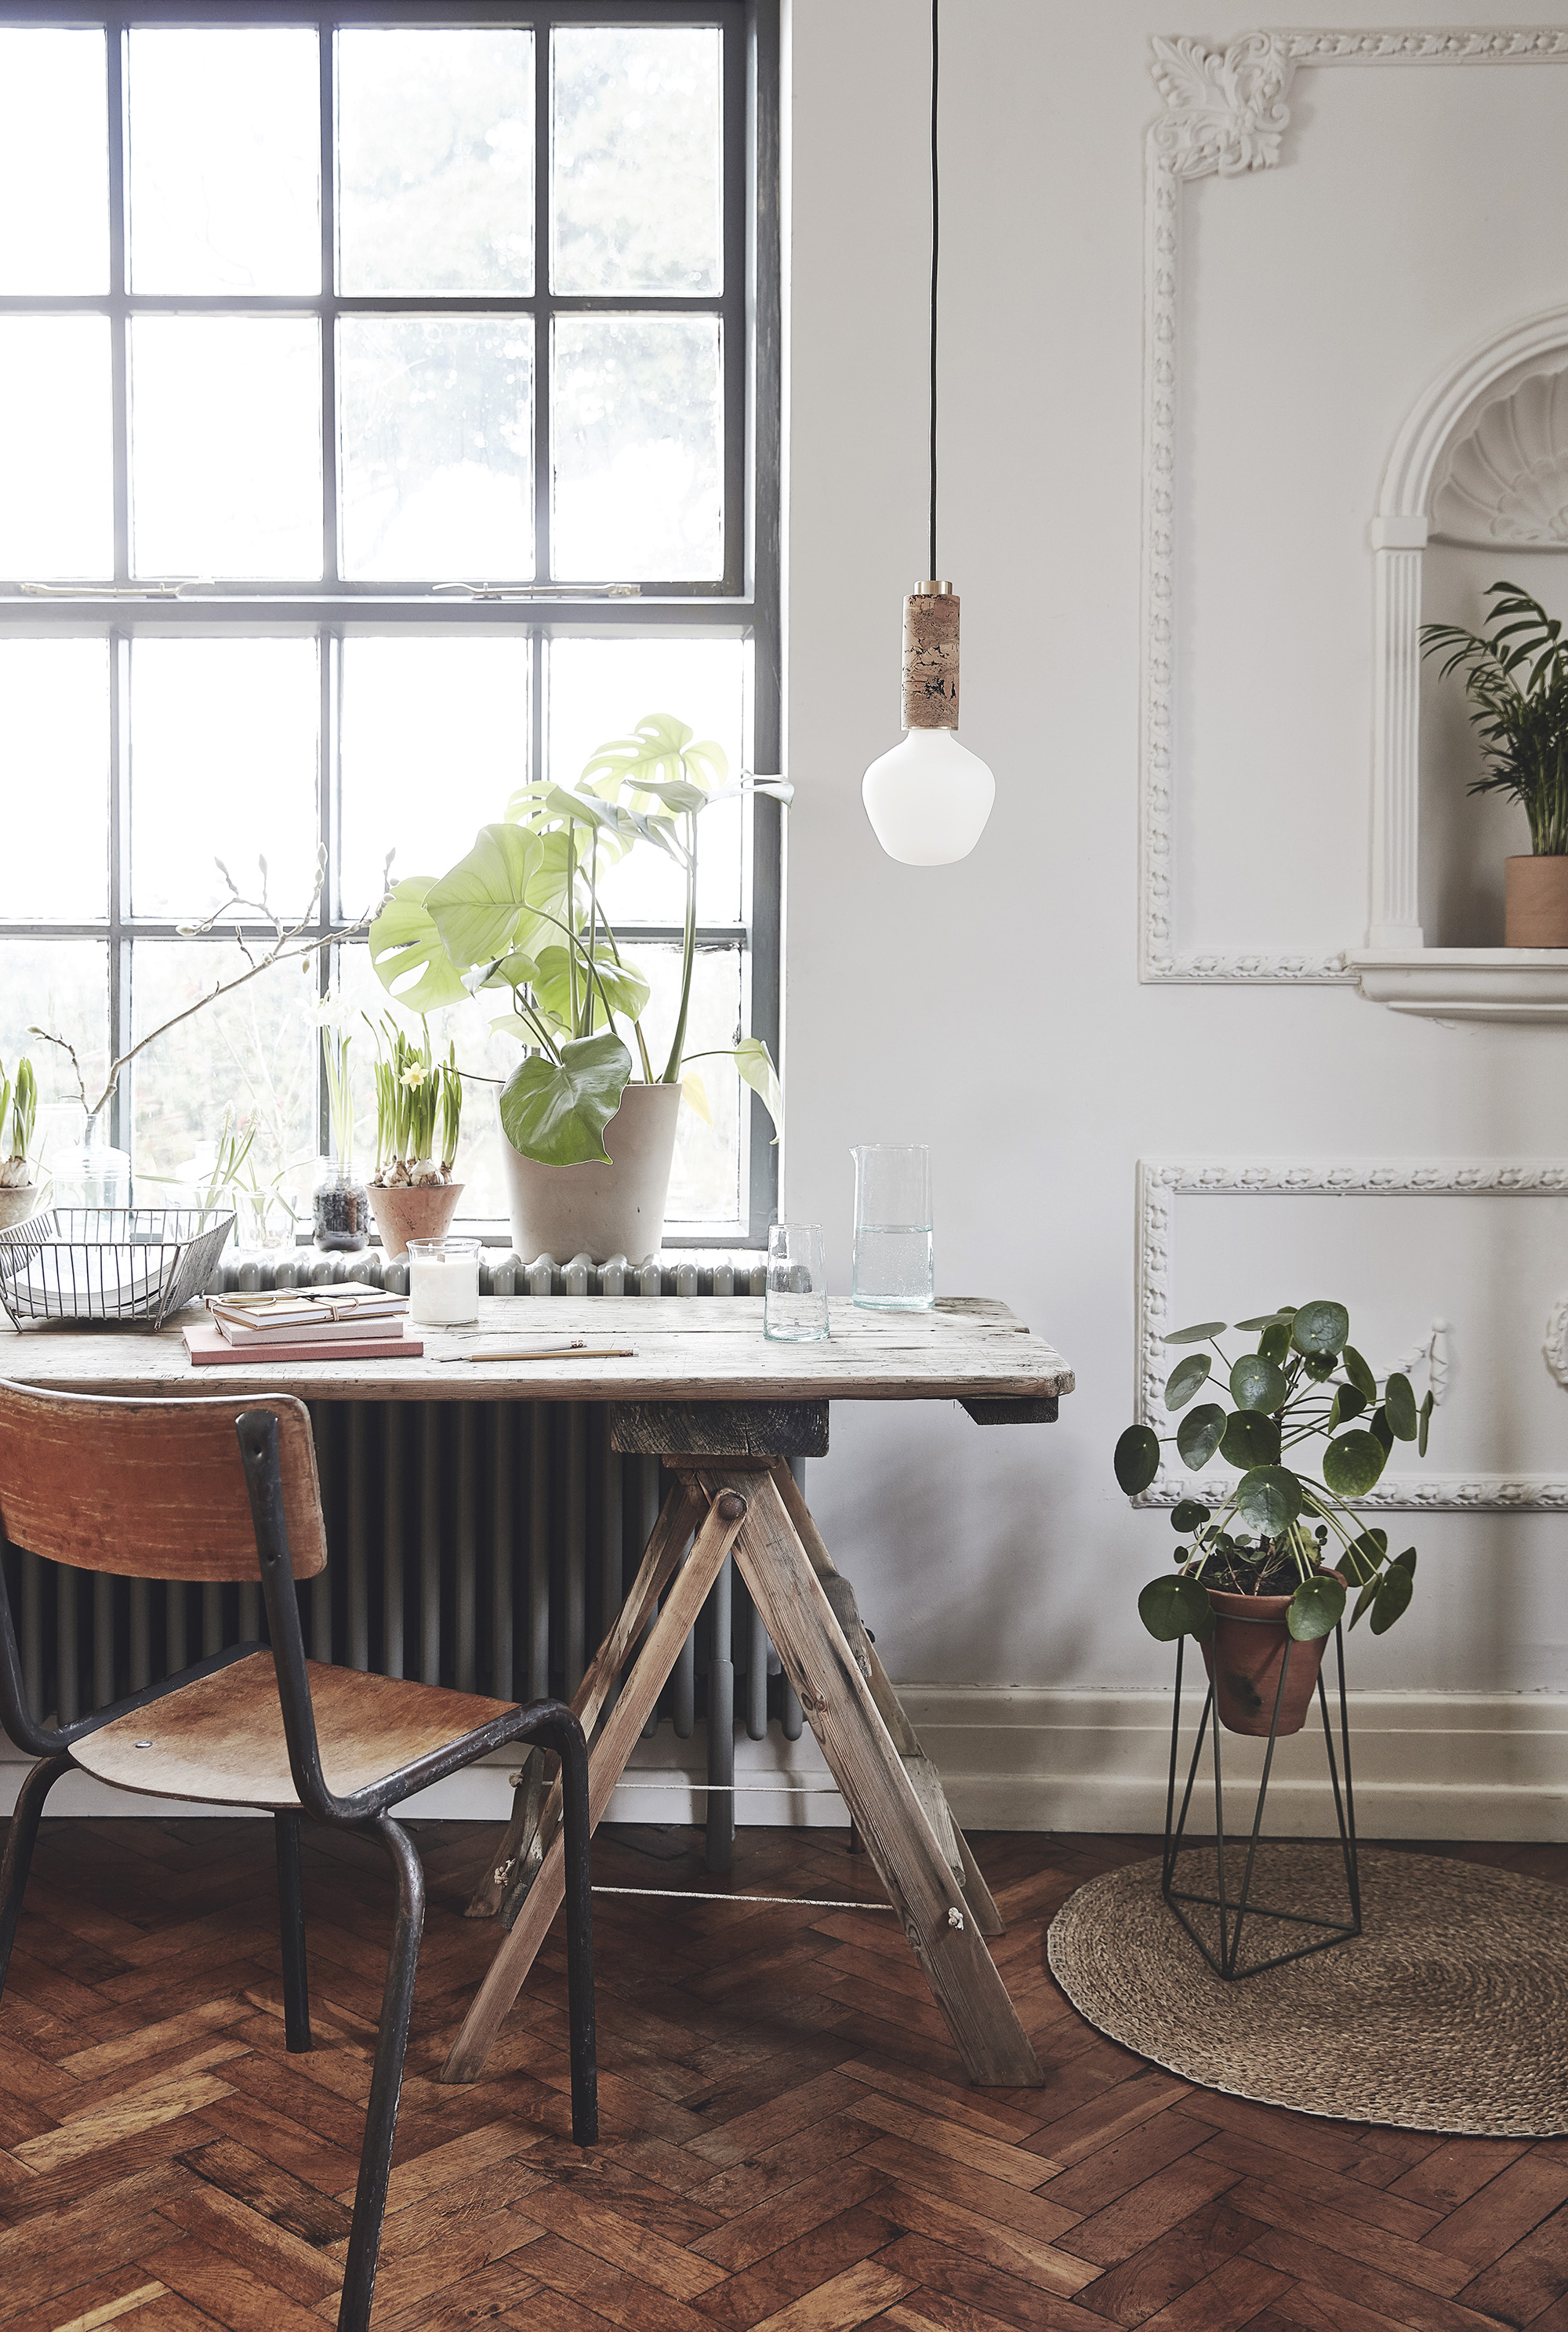 Cork lighting – Nove Lighting; Organic cotton stationary – Folk Interiors; Drinking glass and carafe – Form Lifestyle; Terracotta planter on stand – Object Style; Reclaimed wire tray and vintage terracotta pots on windowsill – The Old Potato Store